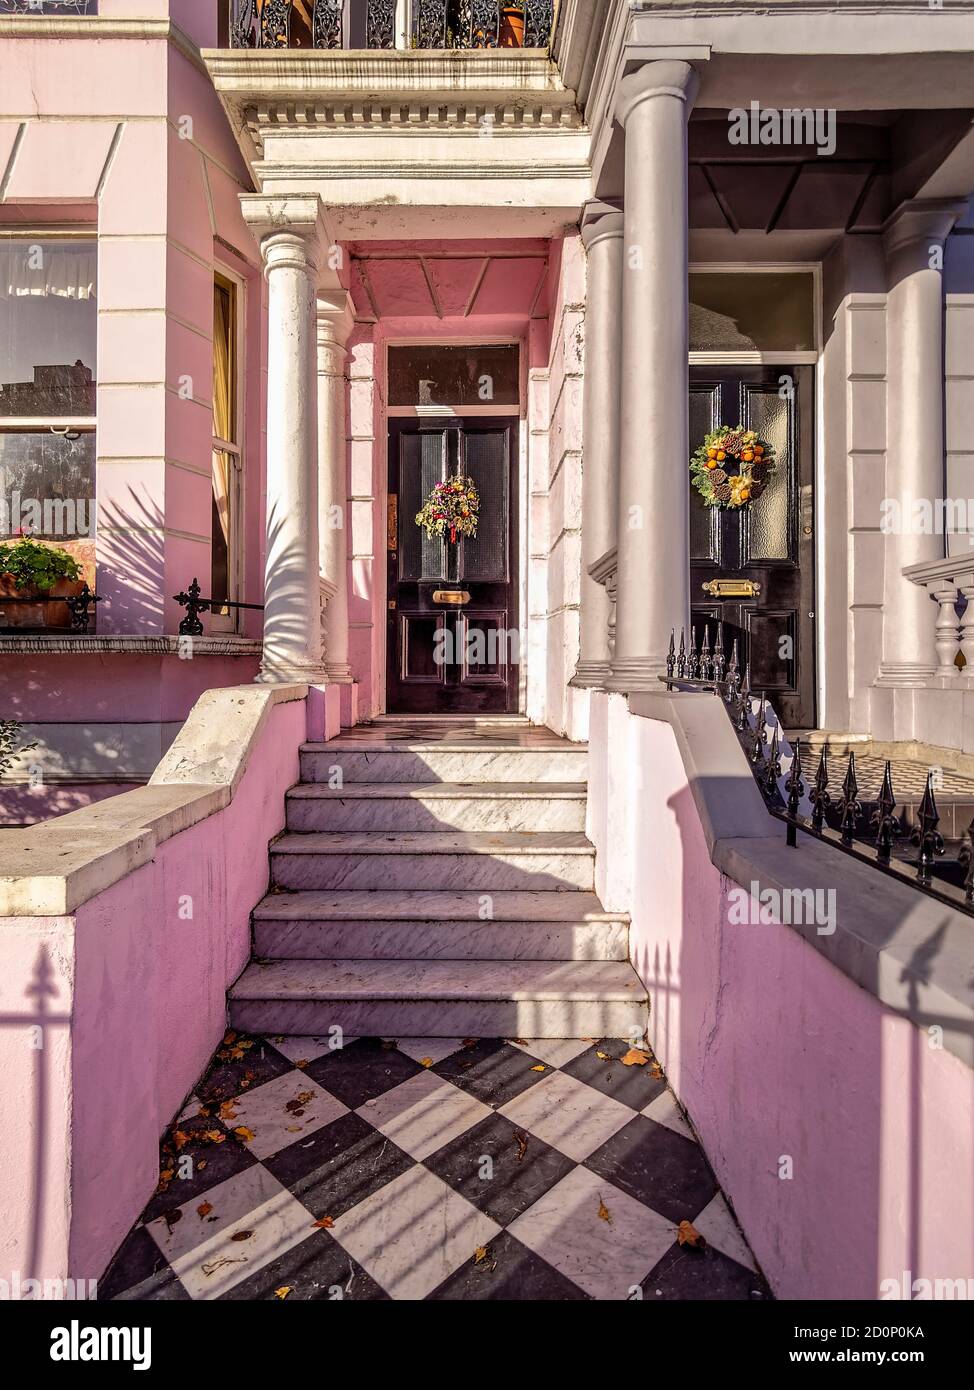 Sunny Christmas Day in Notting Hill. Two adjacent house entrances with festive Christmas decorations in London, United Kingdom. Stock Photo